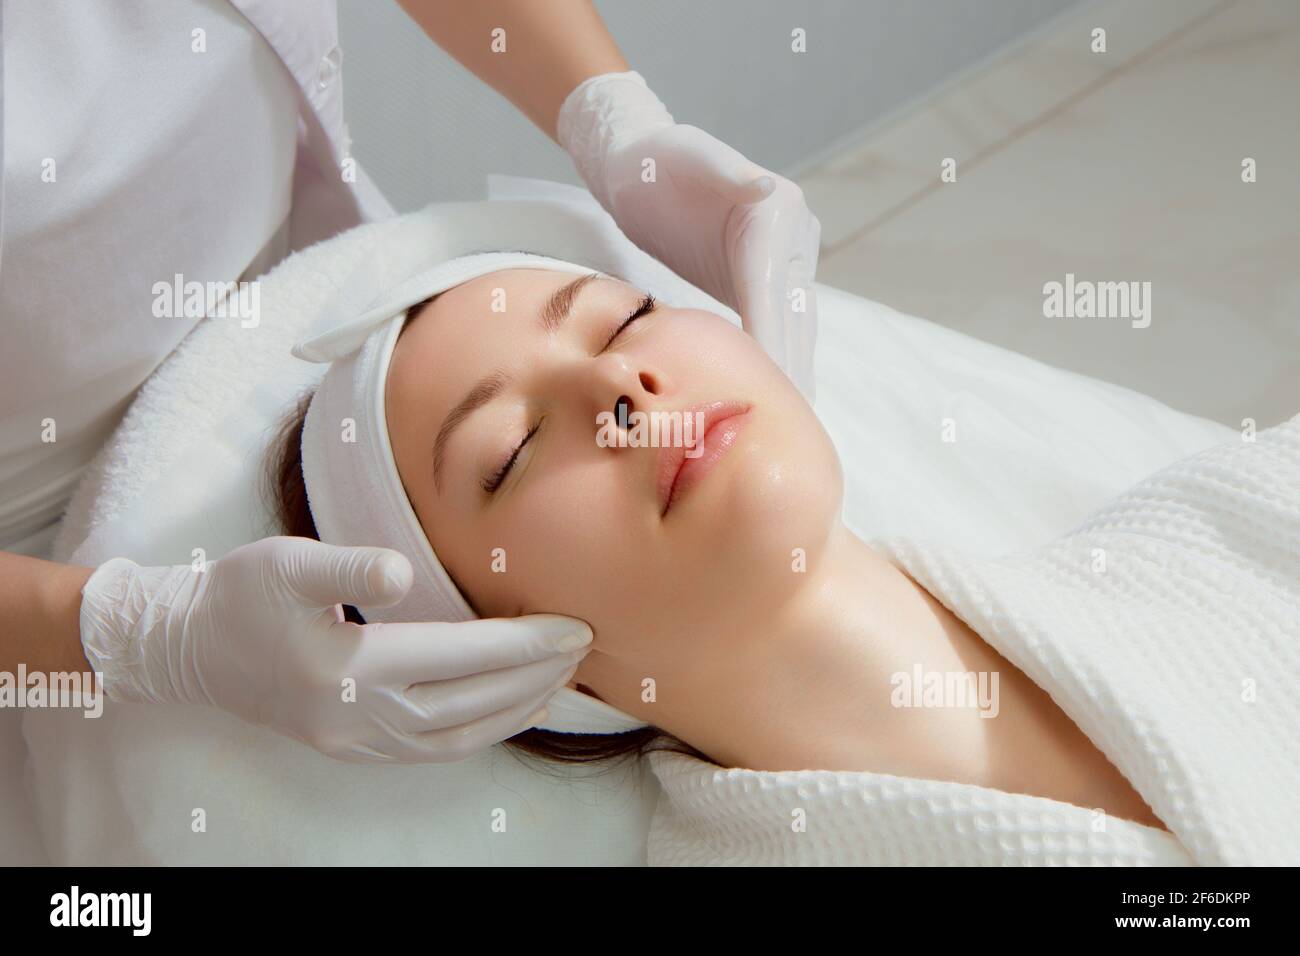 A young woman with perfect skin gets a facial massage at a cosmetology clinic Stock Photo